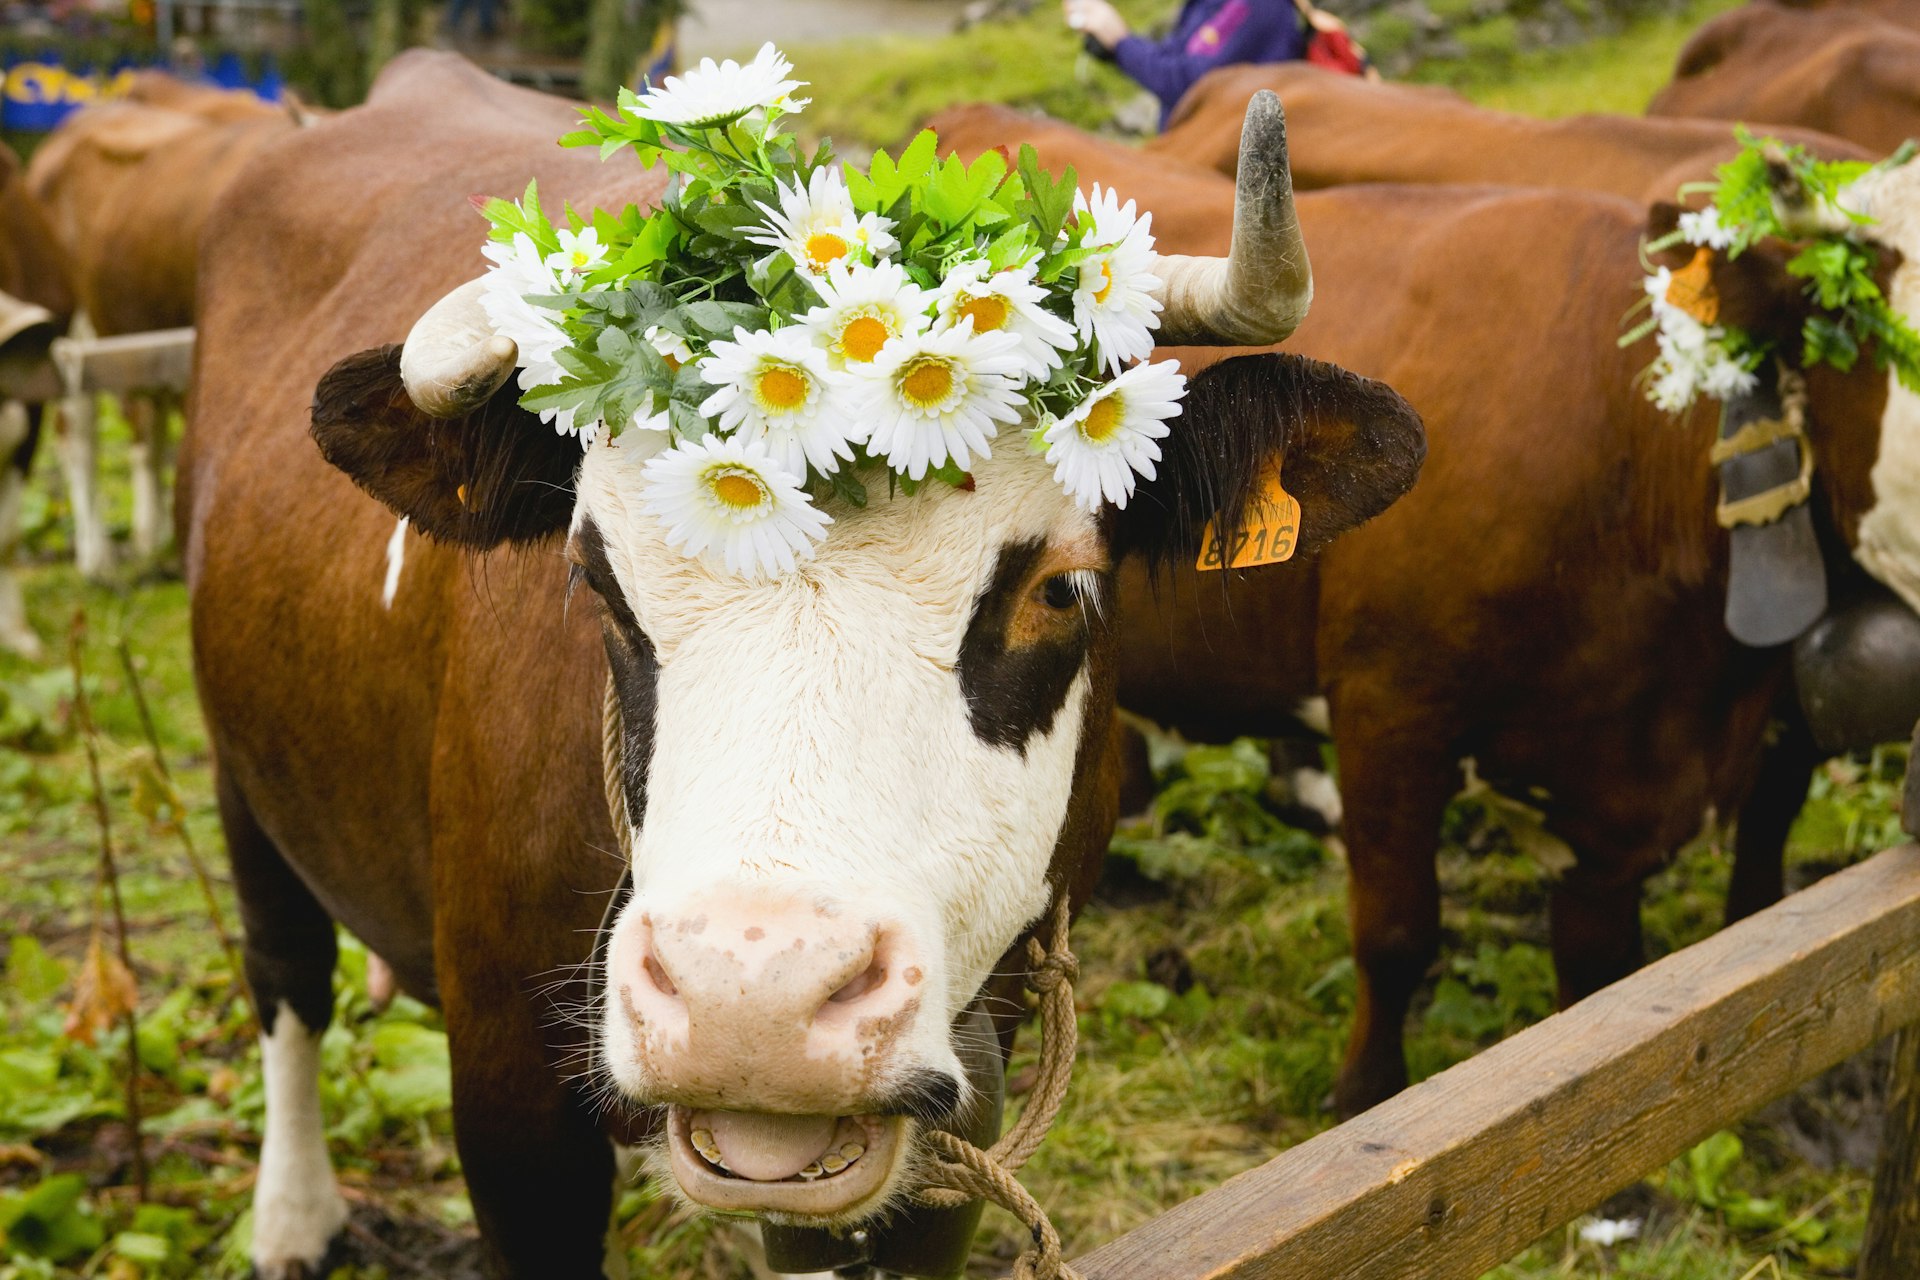 A cow adorned with flowers